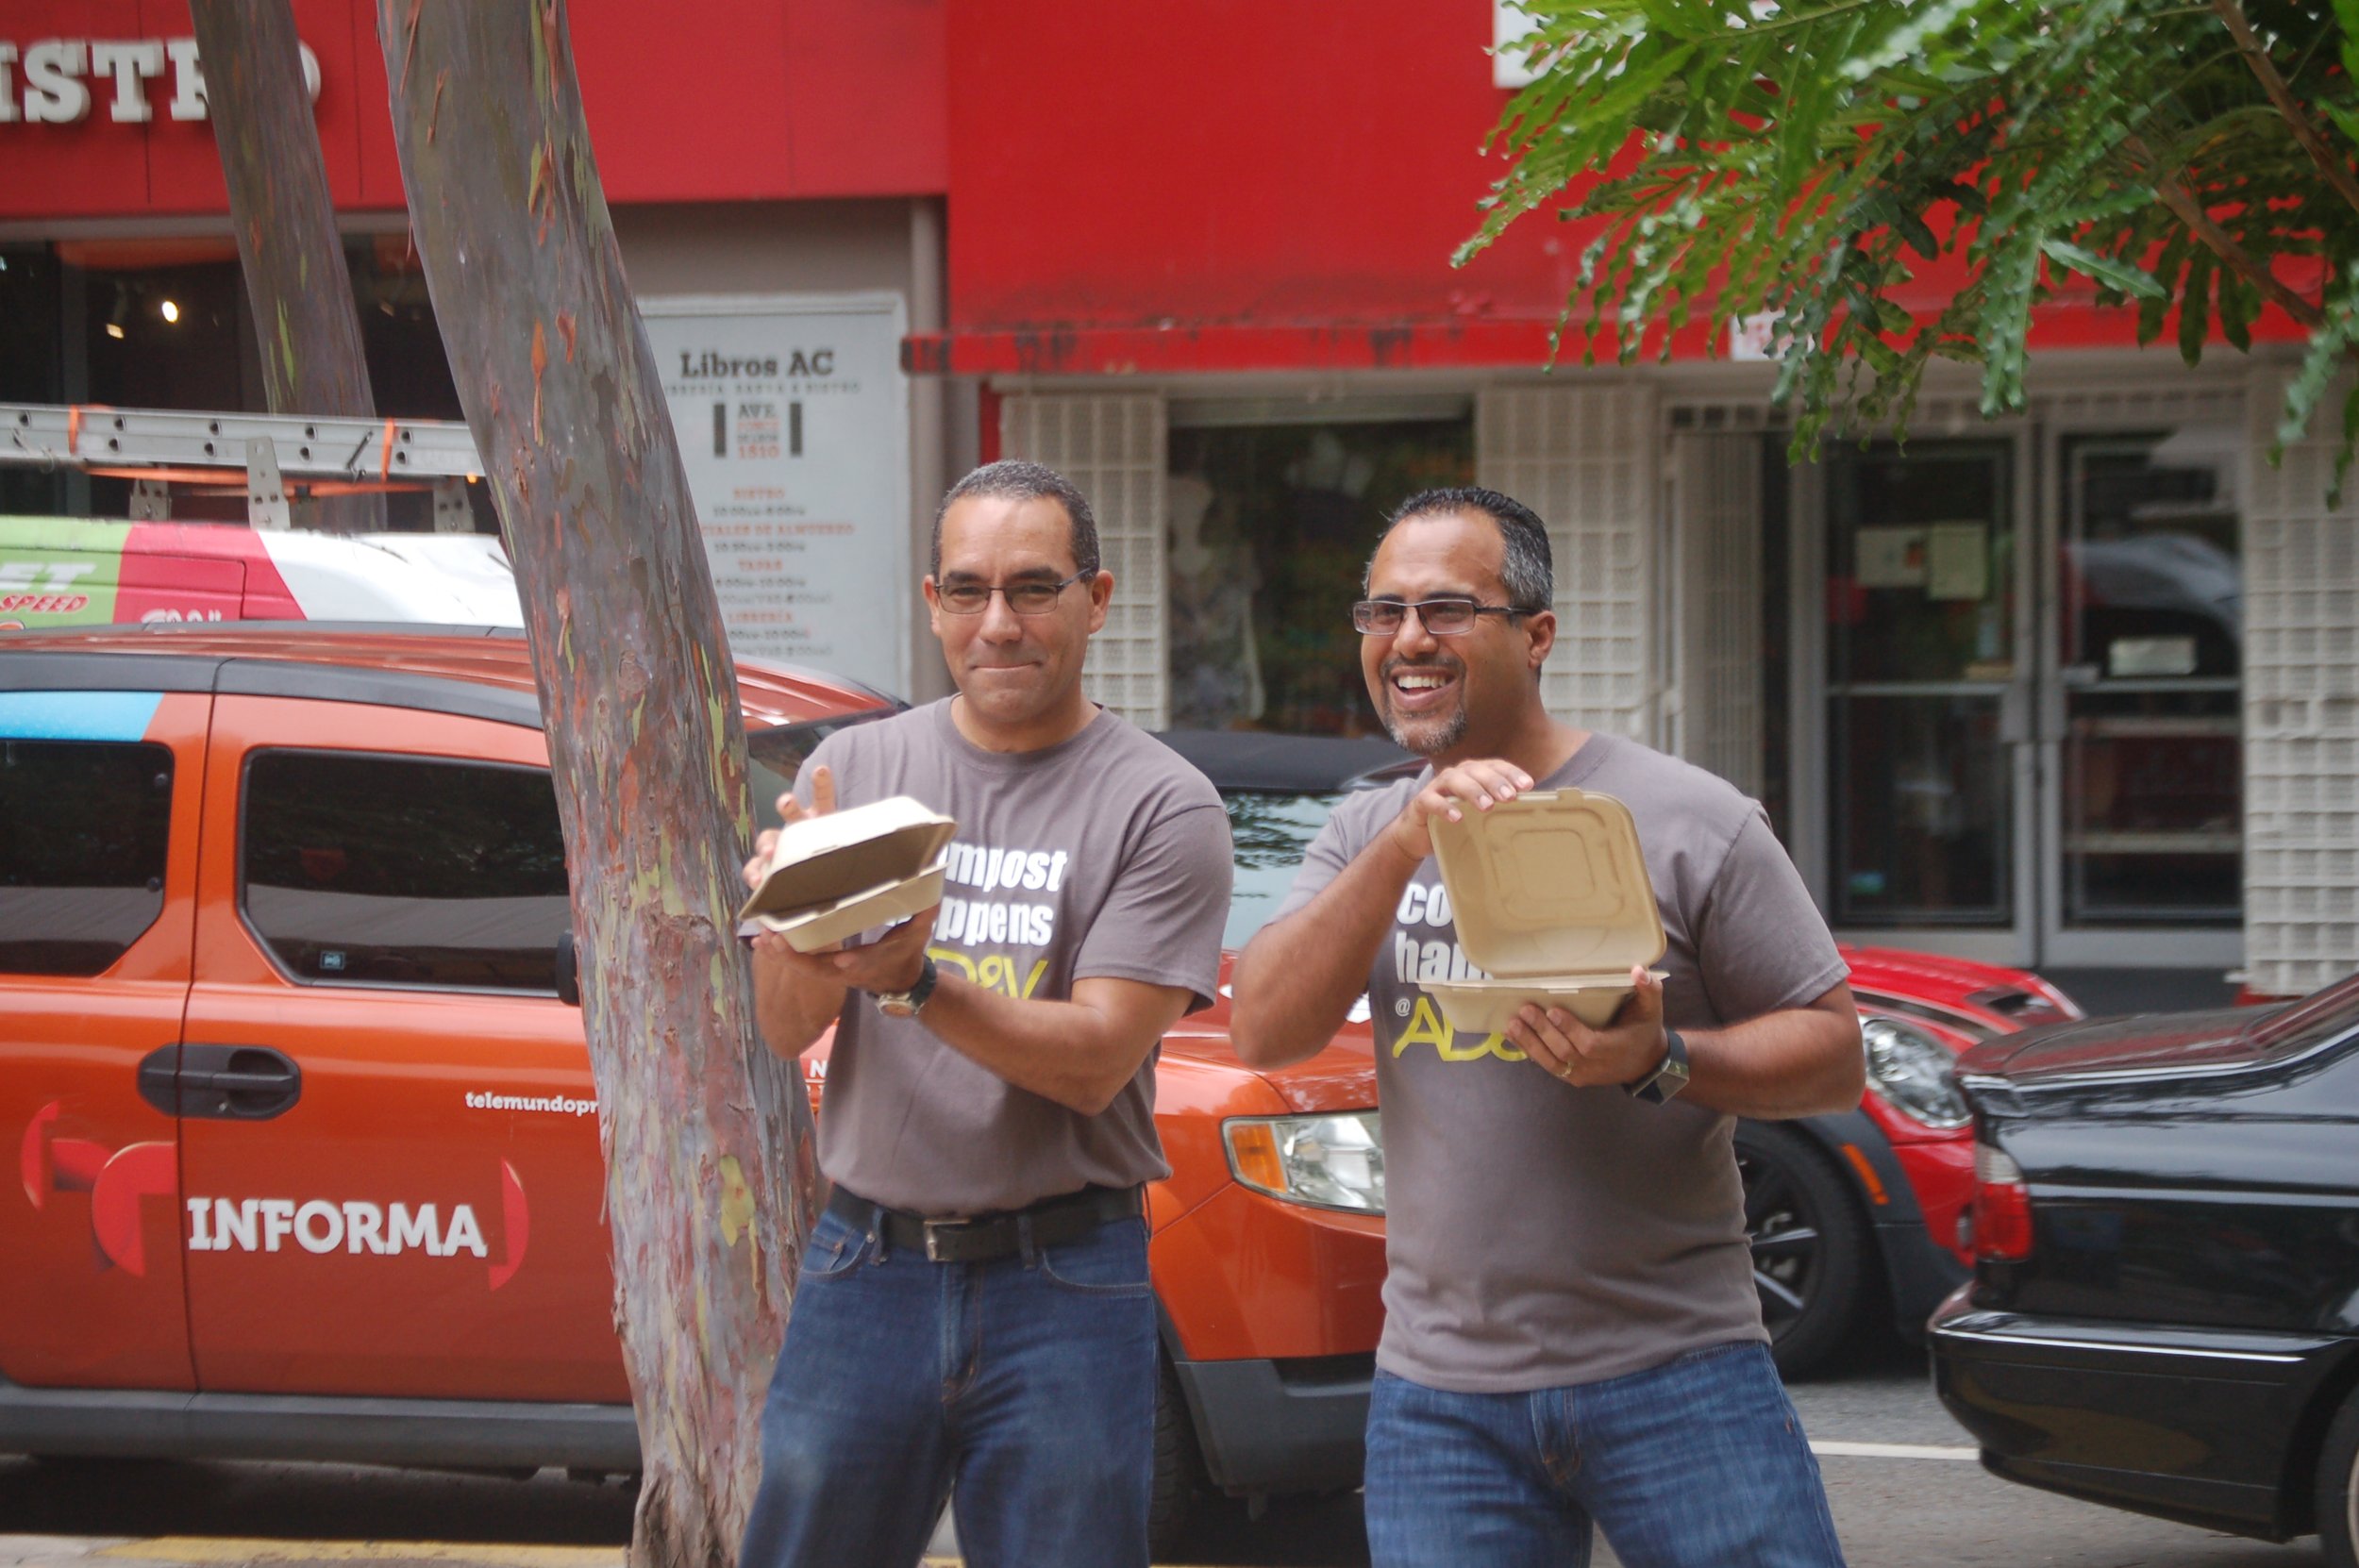  AD&amp;V team members posing for picture with compostable food containers 